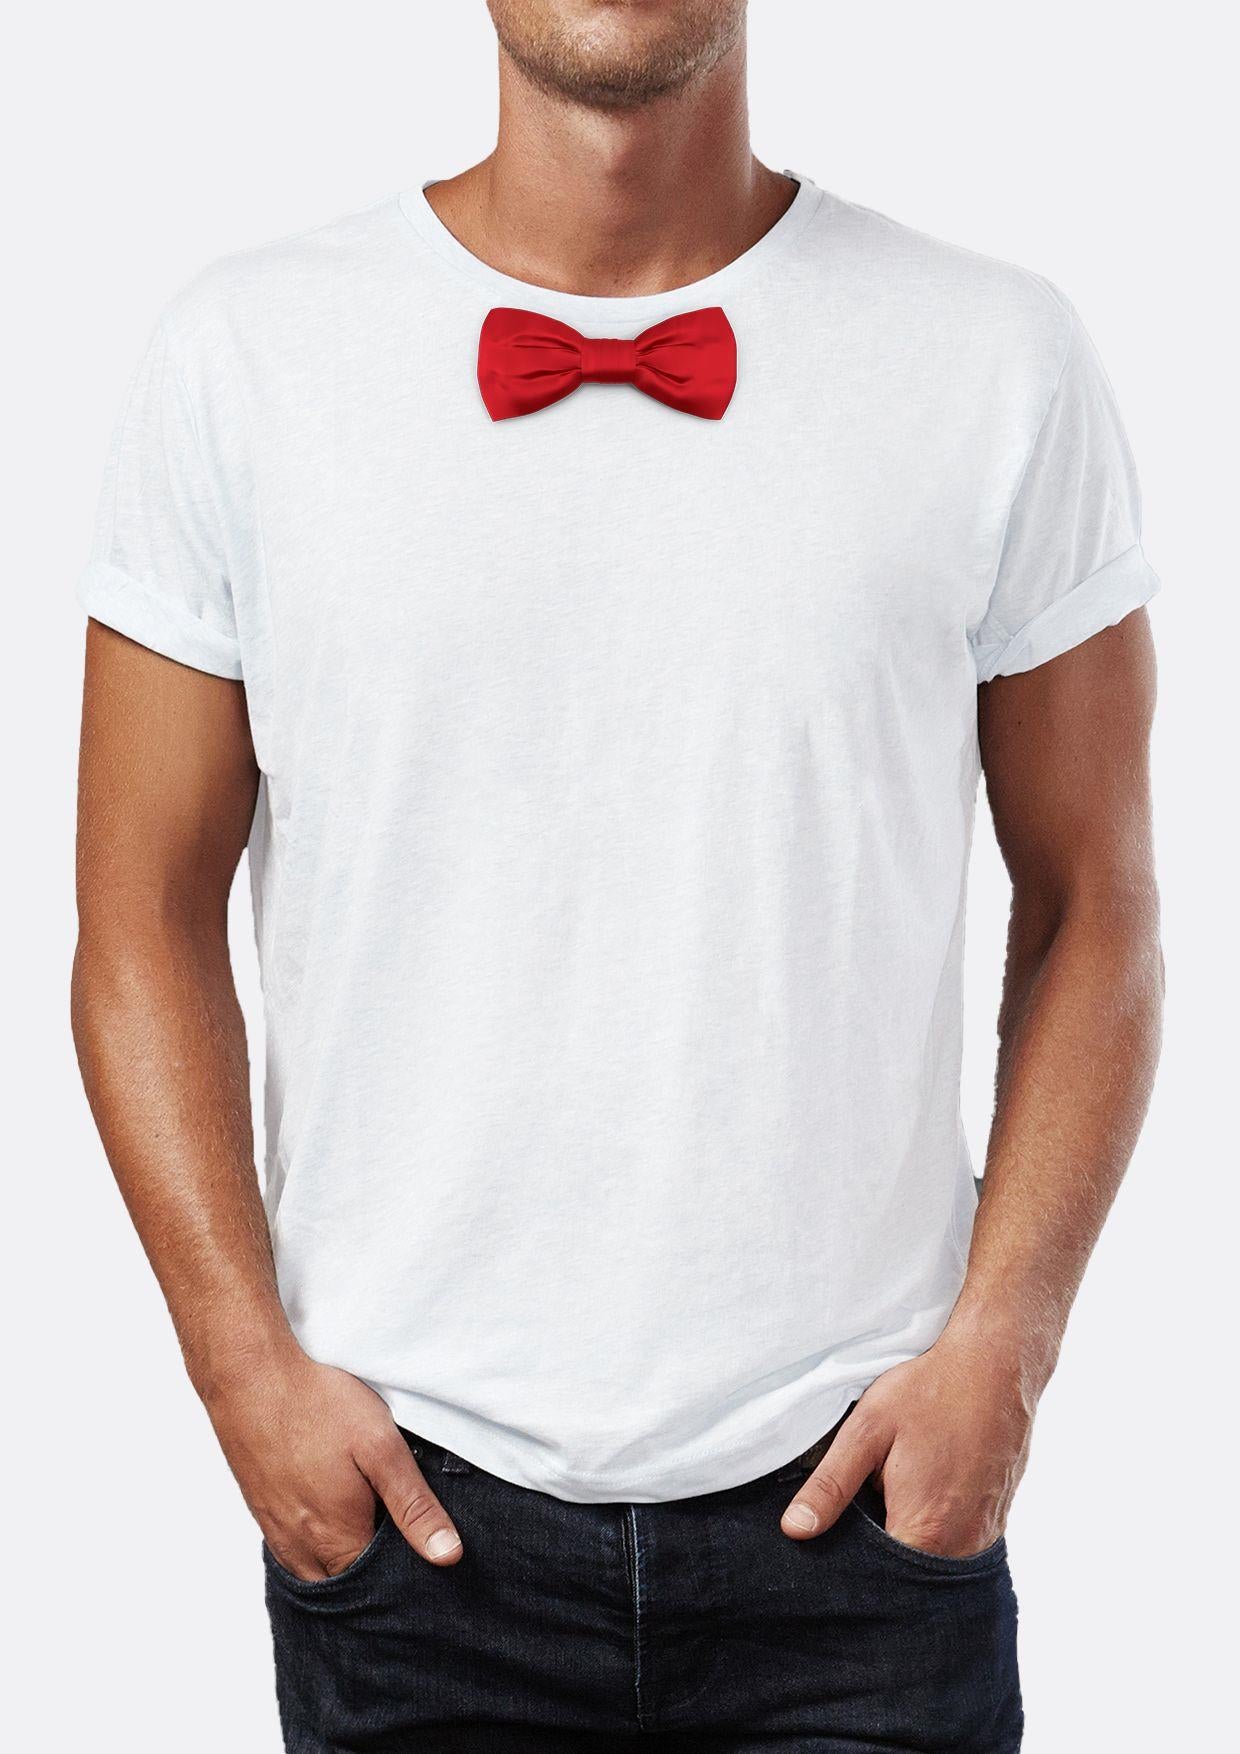 Red bow tie printed Crew Neck men's t -shirt